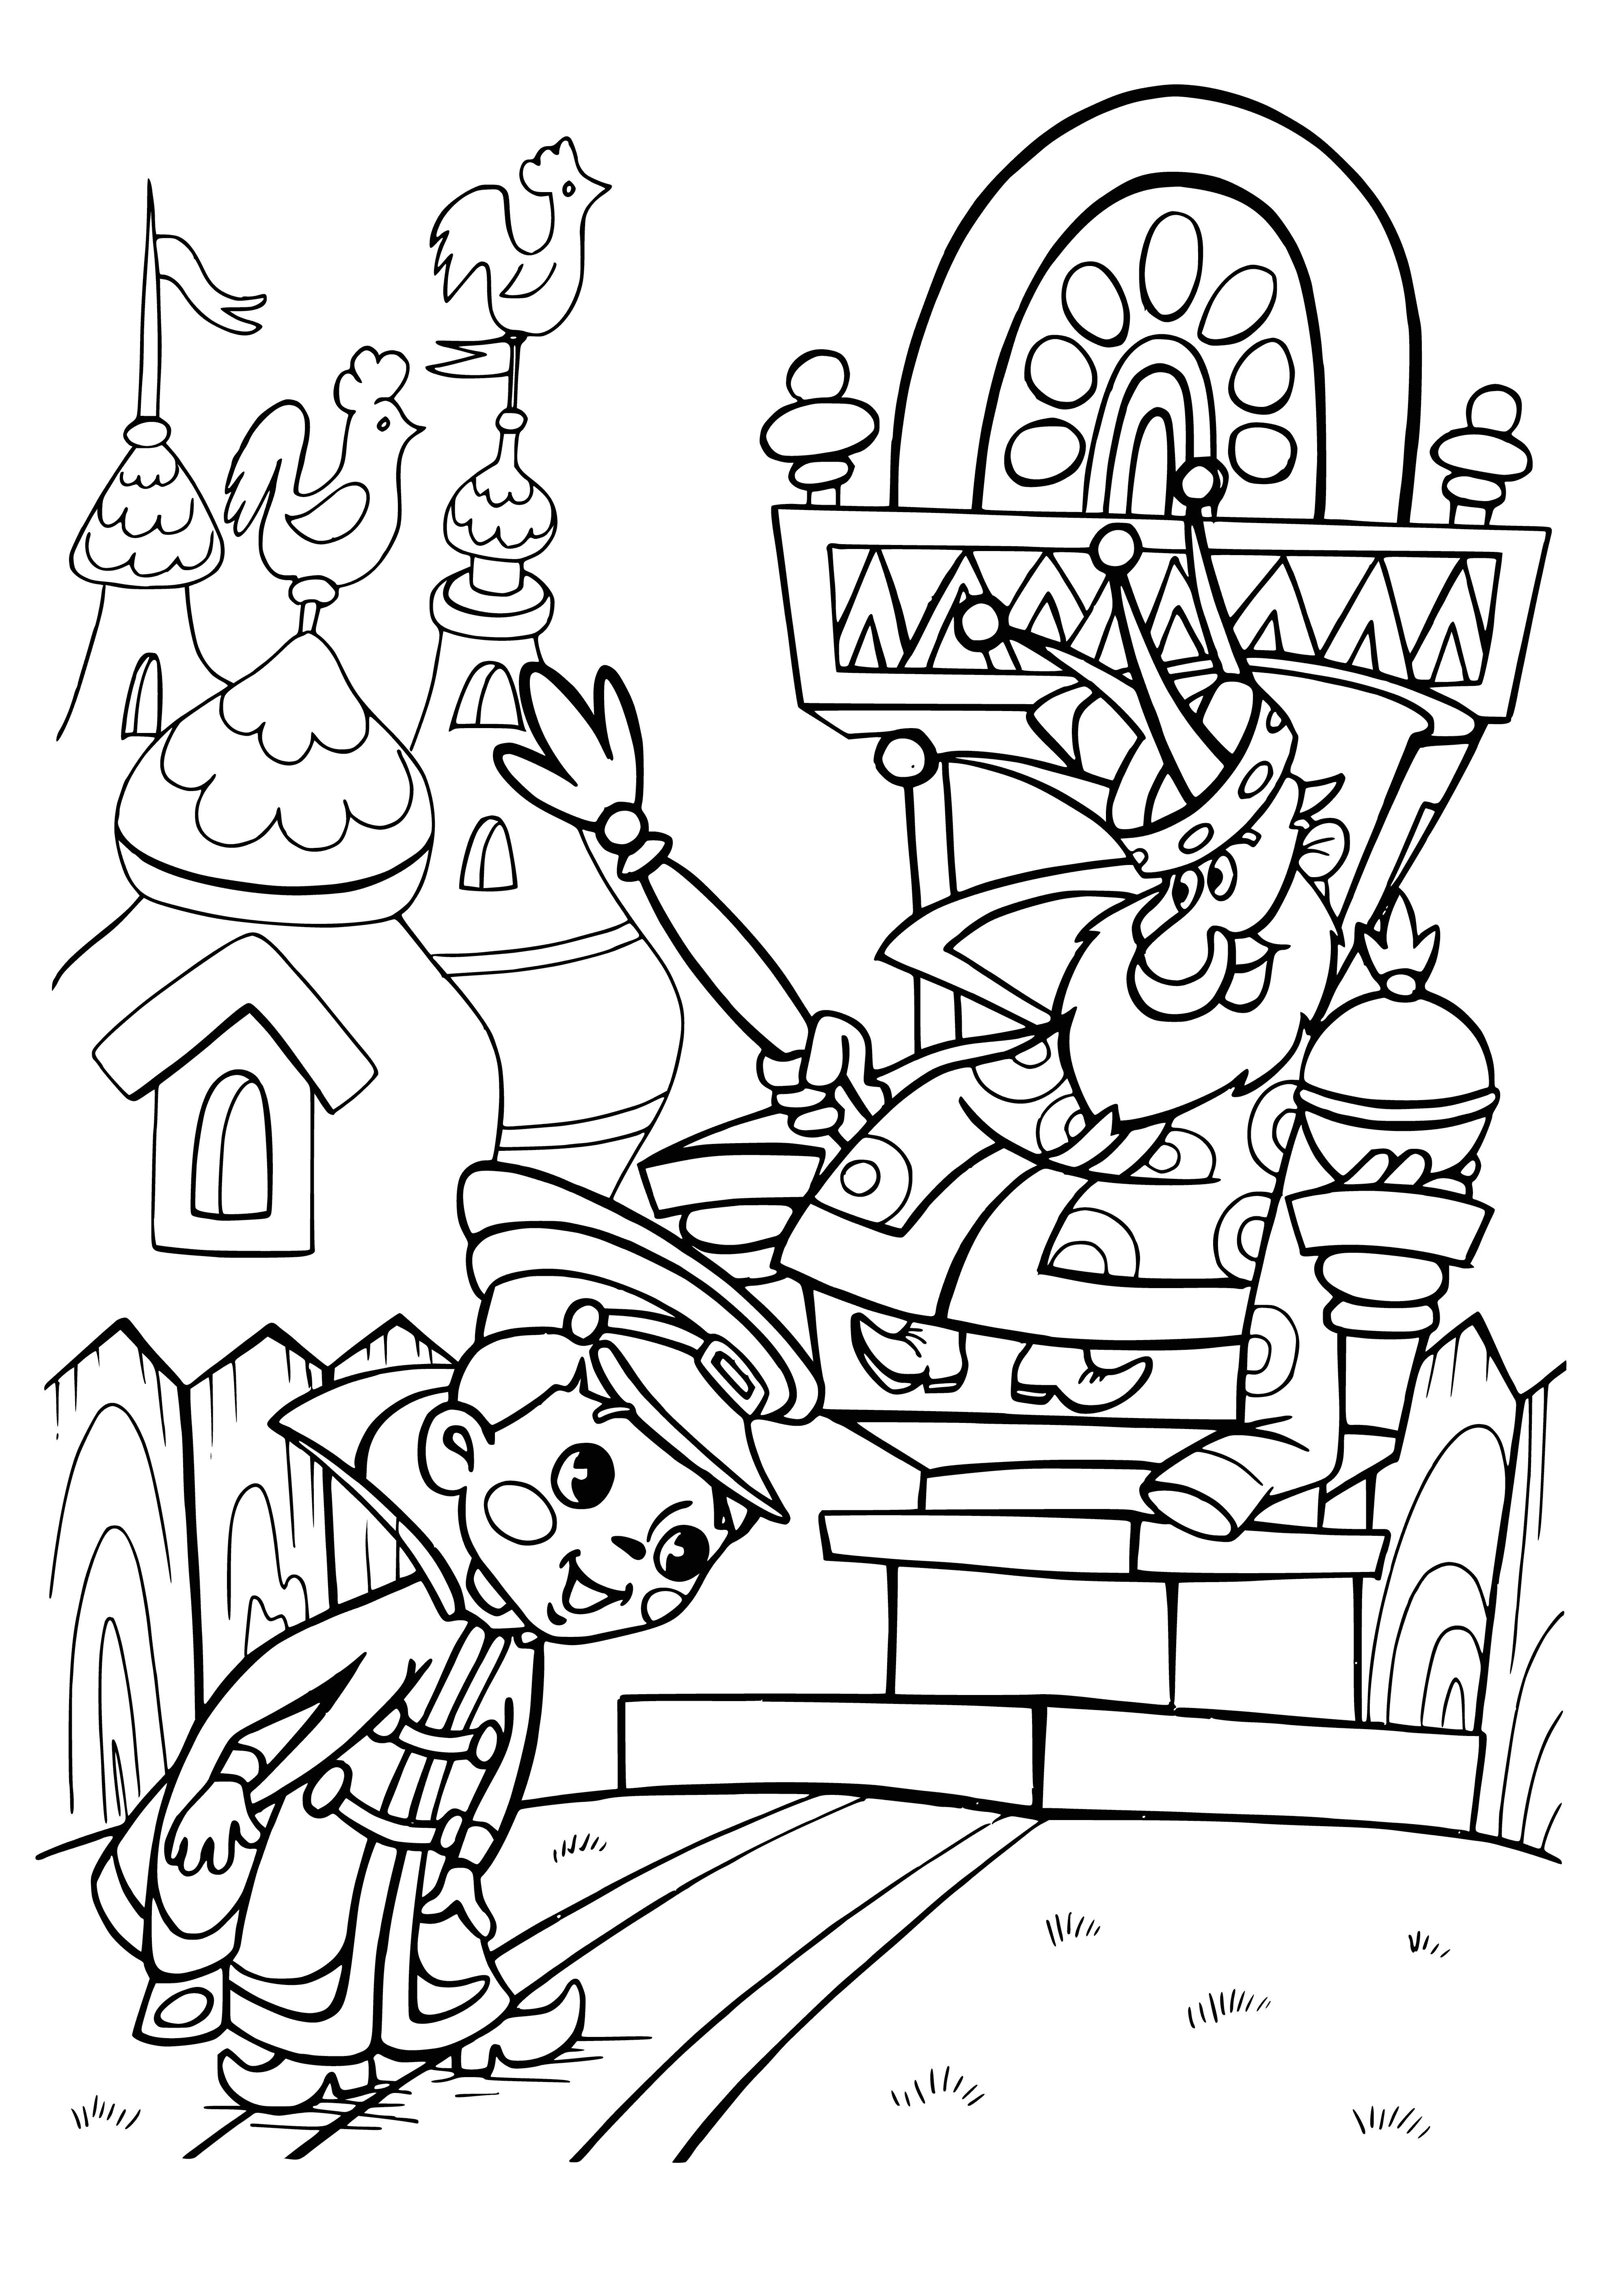 coloring page: King on throne with sceptre, wearing purple and crown. Sitting on golden chair.